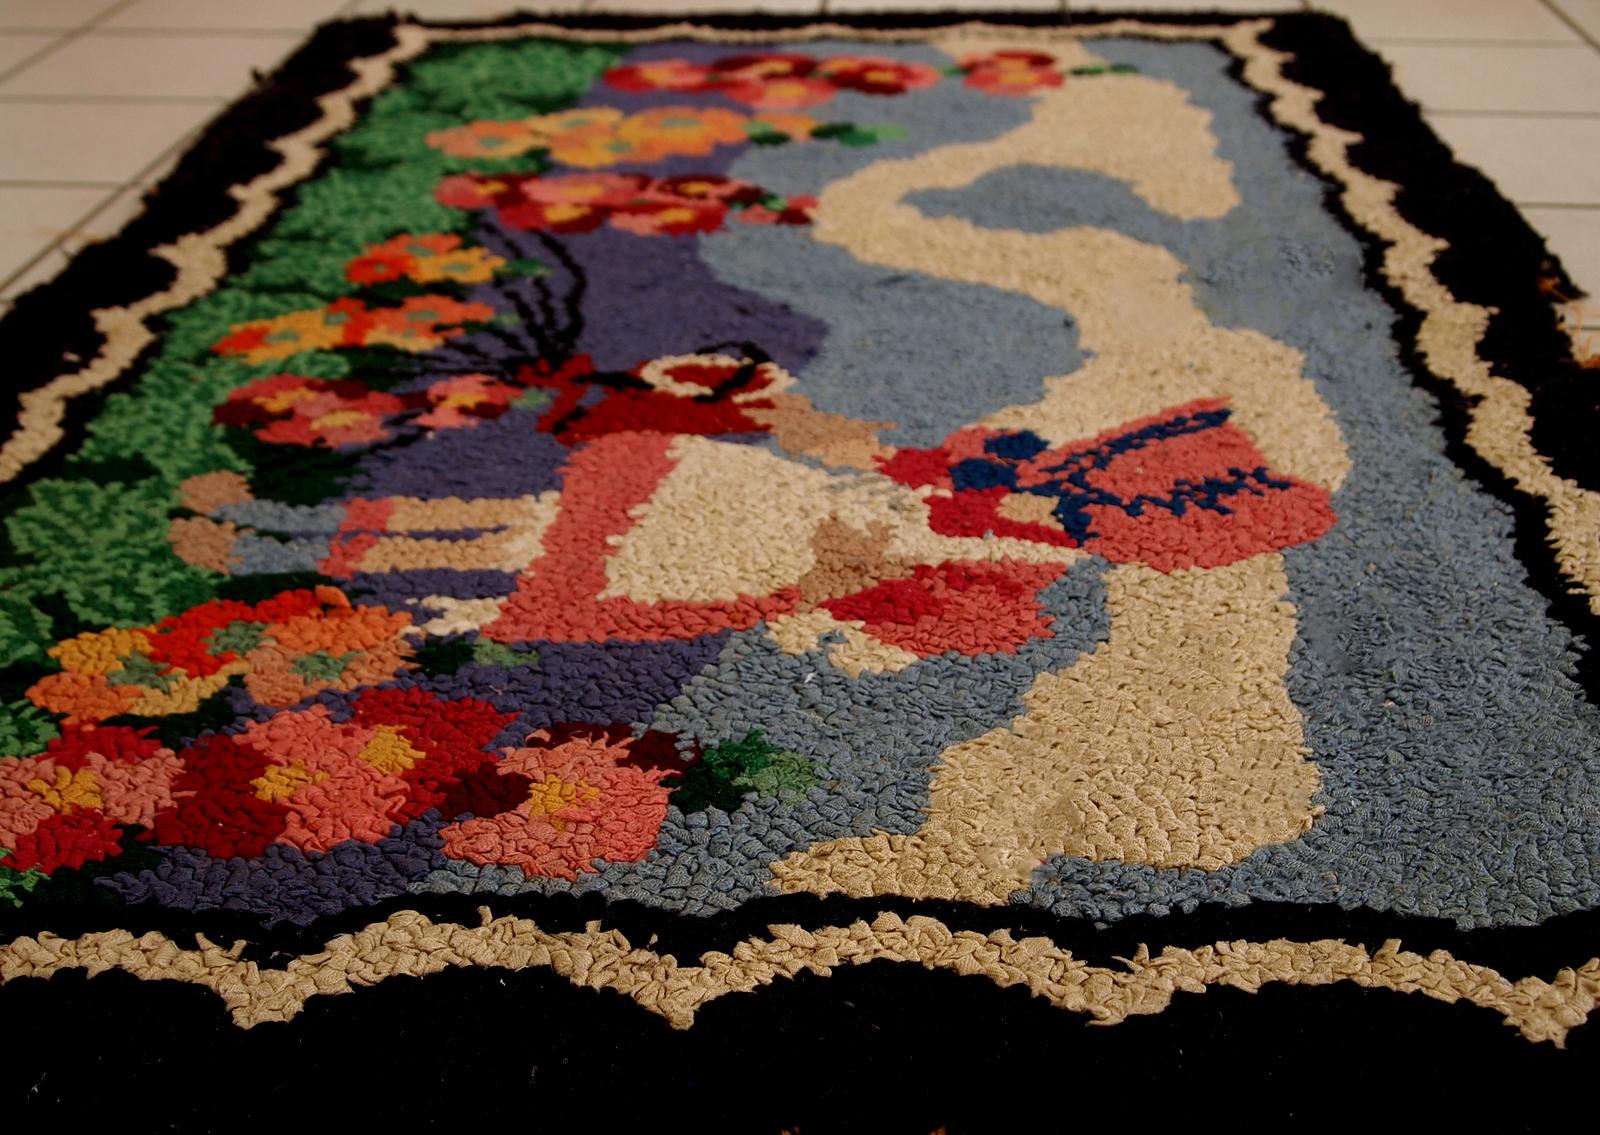 Handmade antique American hooked rug in pictorial design. The rug is from the beginning of 20th century in good condition.

-Condition: Good,

-circa 1920s,

-Size: 2.6' x 4.1' (79cm x 125cm),

-Material: wool,

-Country of origin: